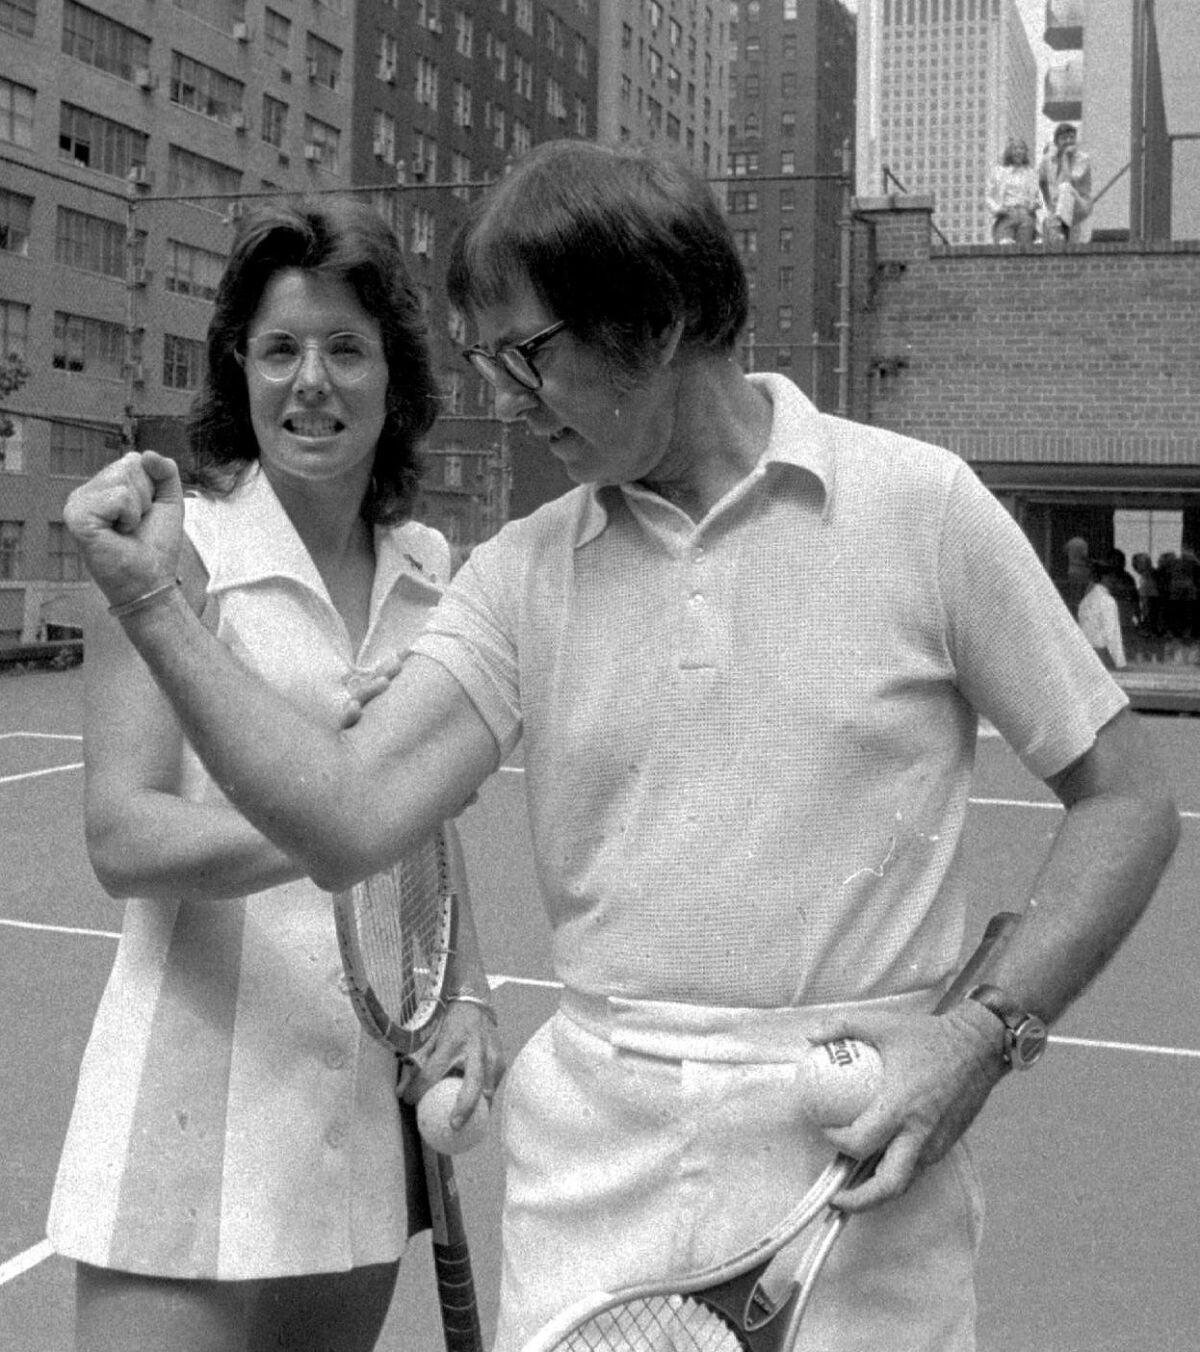 Billie Jean King and Bobby Riggs 